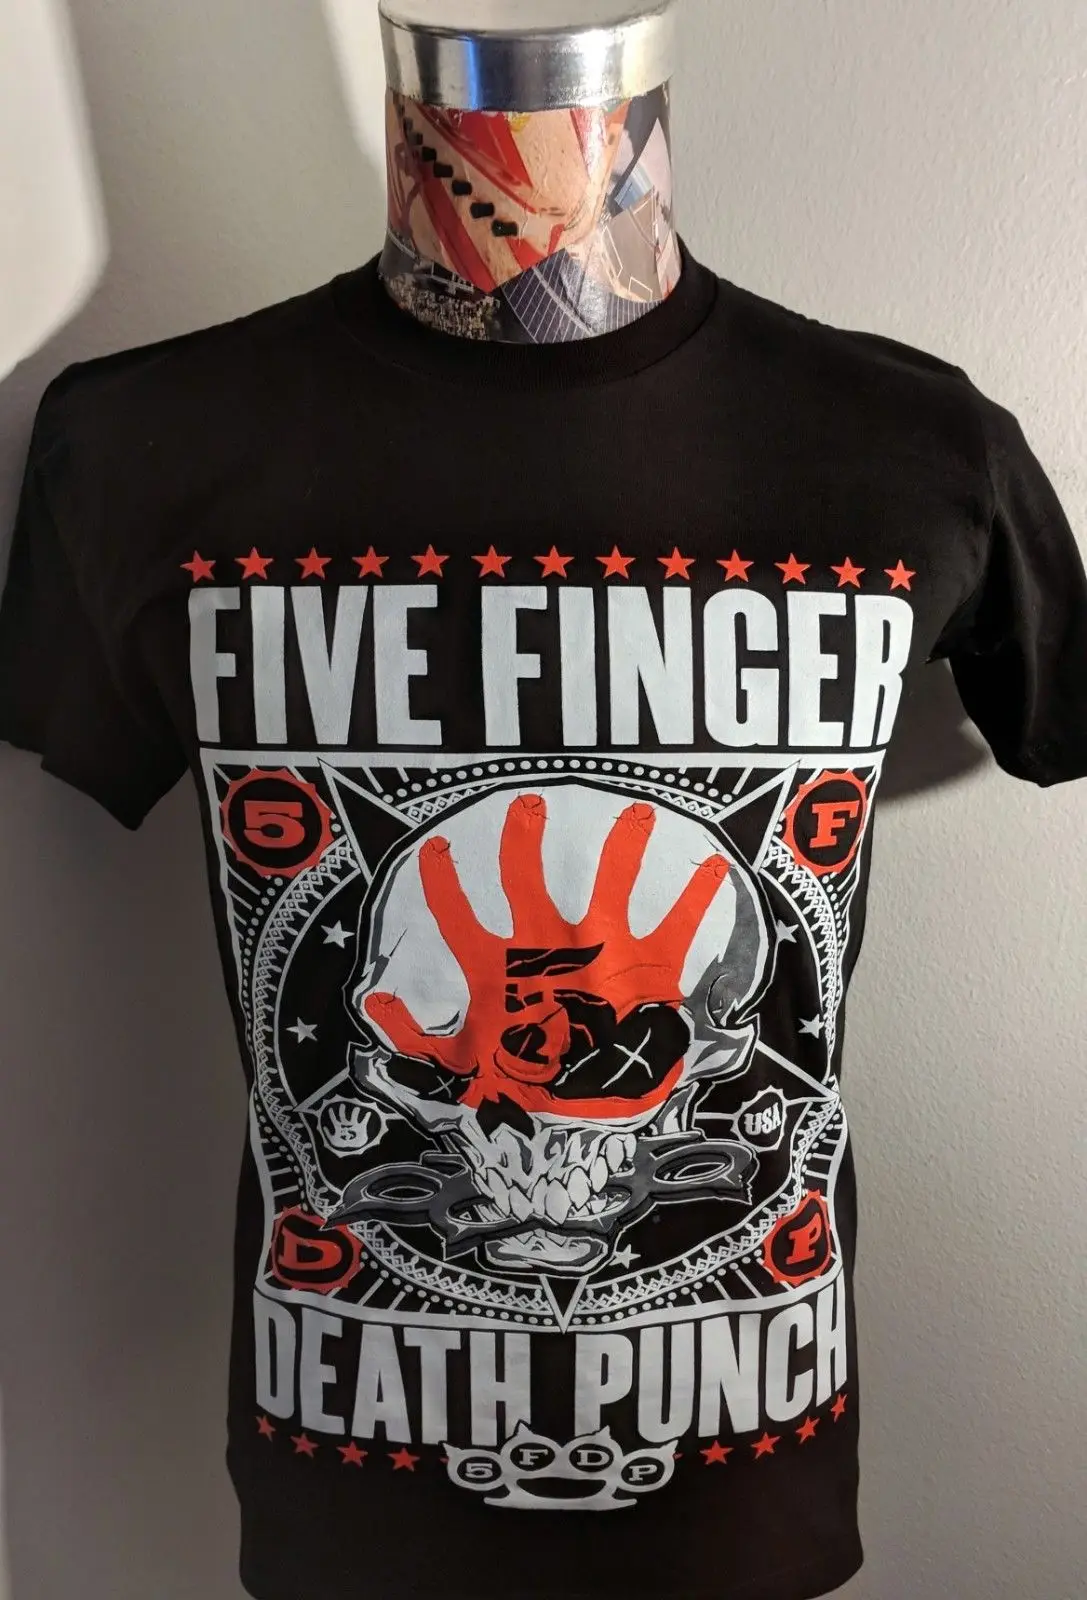 

NEW FIVE FINGER DEATH PUNCH HAND THE WAY OF THE FIST HEAVY METAL BLACK T SHIRT Fashion Style Men Tee 2019 fashion t shirt